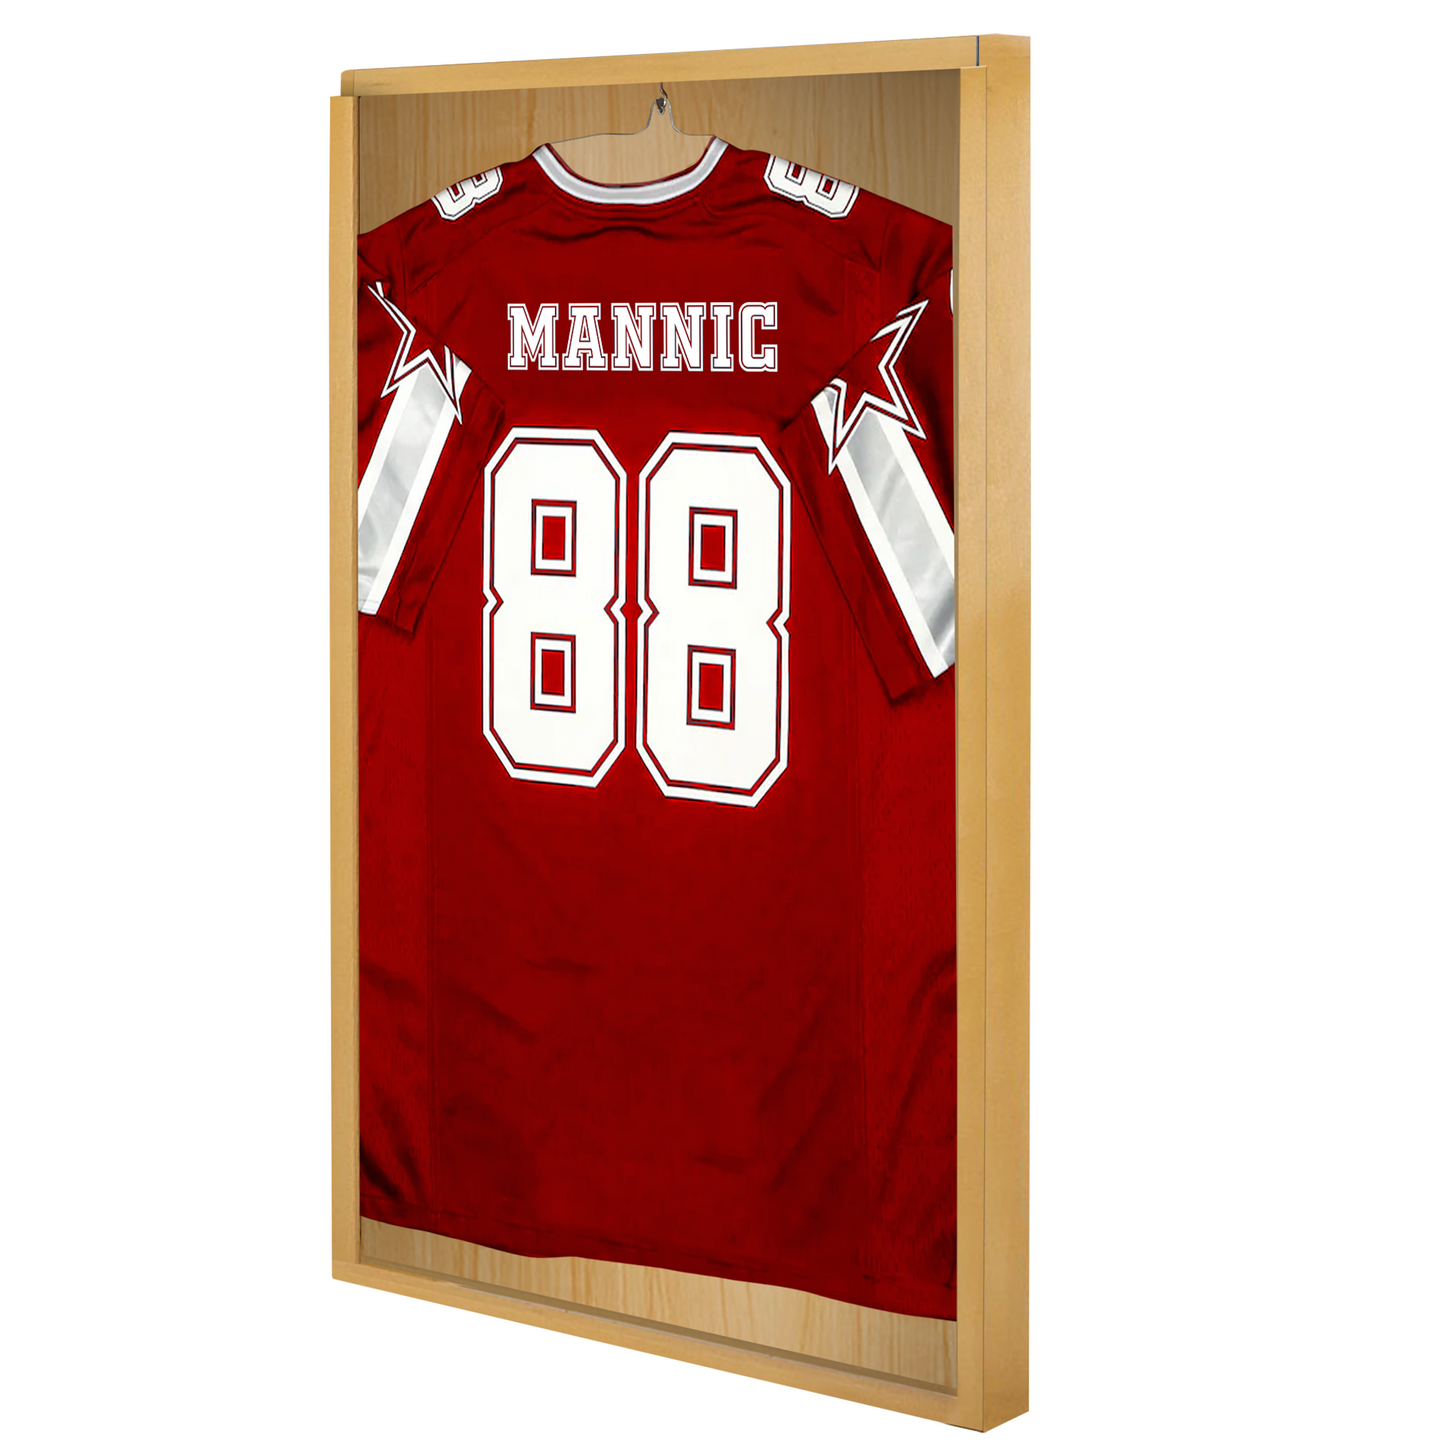 Jersey Frame Display Case - Shadow Box for Jersey Display